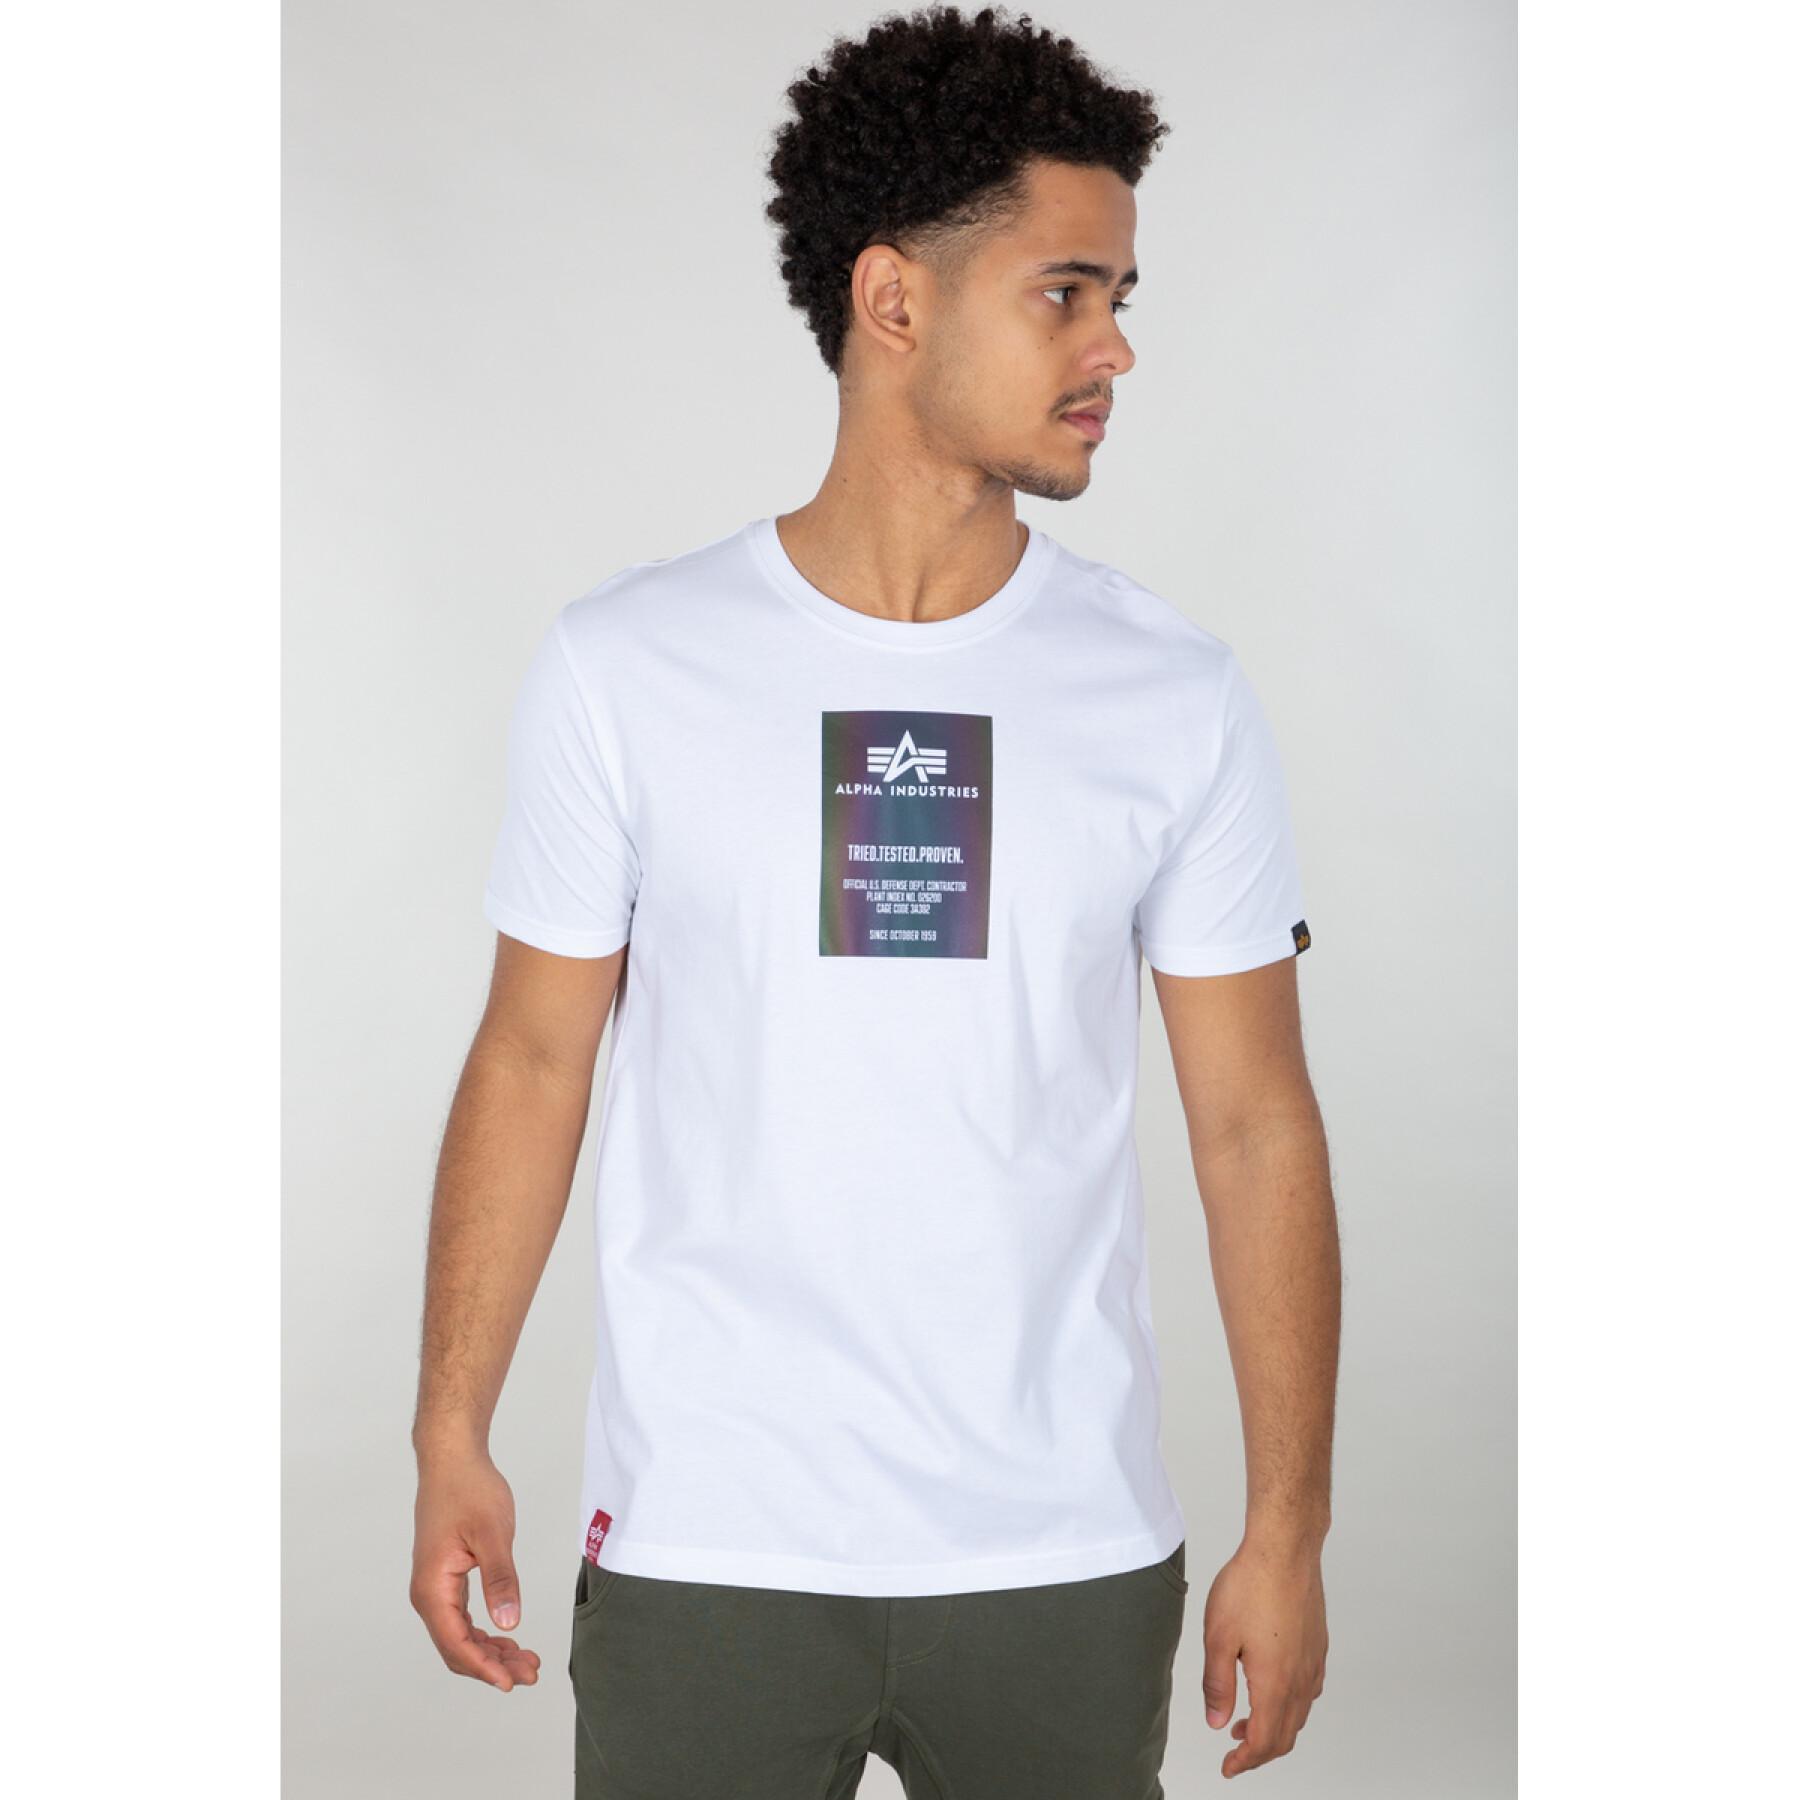 Rainbow T-shirt Industries T-shirts Man - Label - shirts Polo Reflective - Lifestyle and Alpha